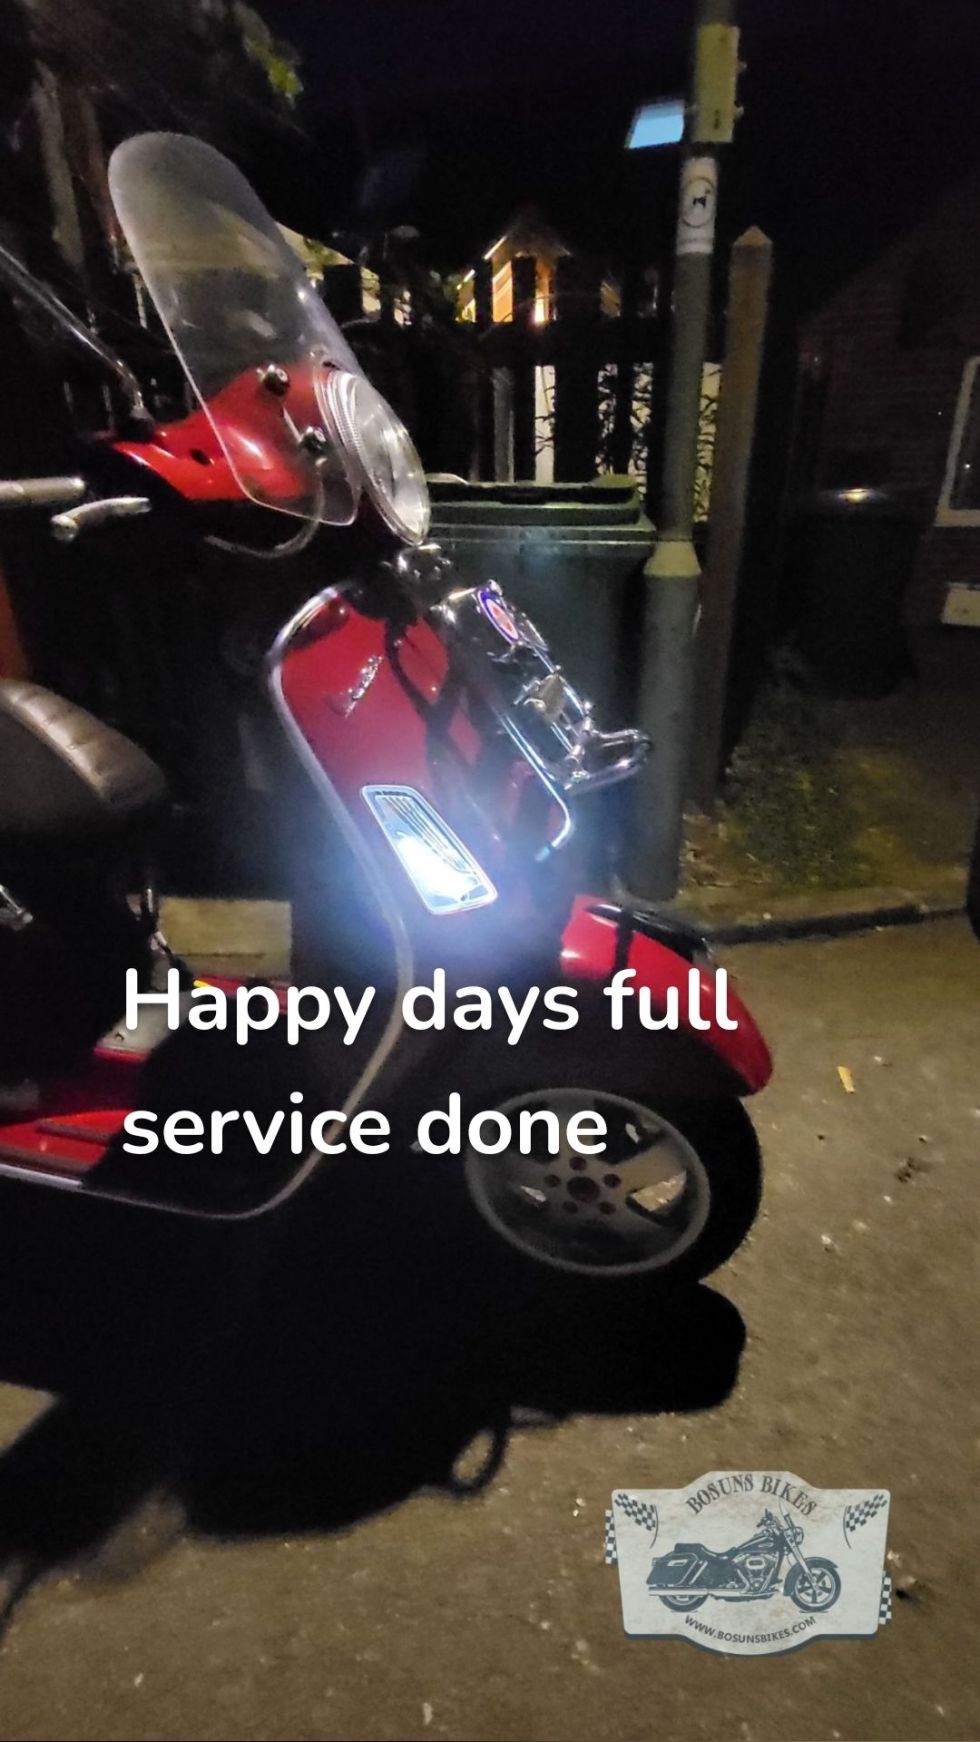 Happy days full service done